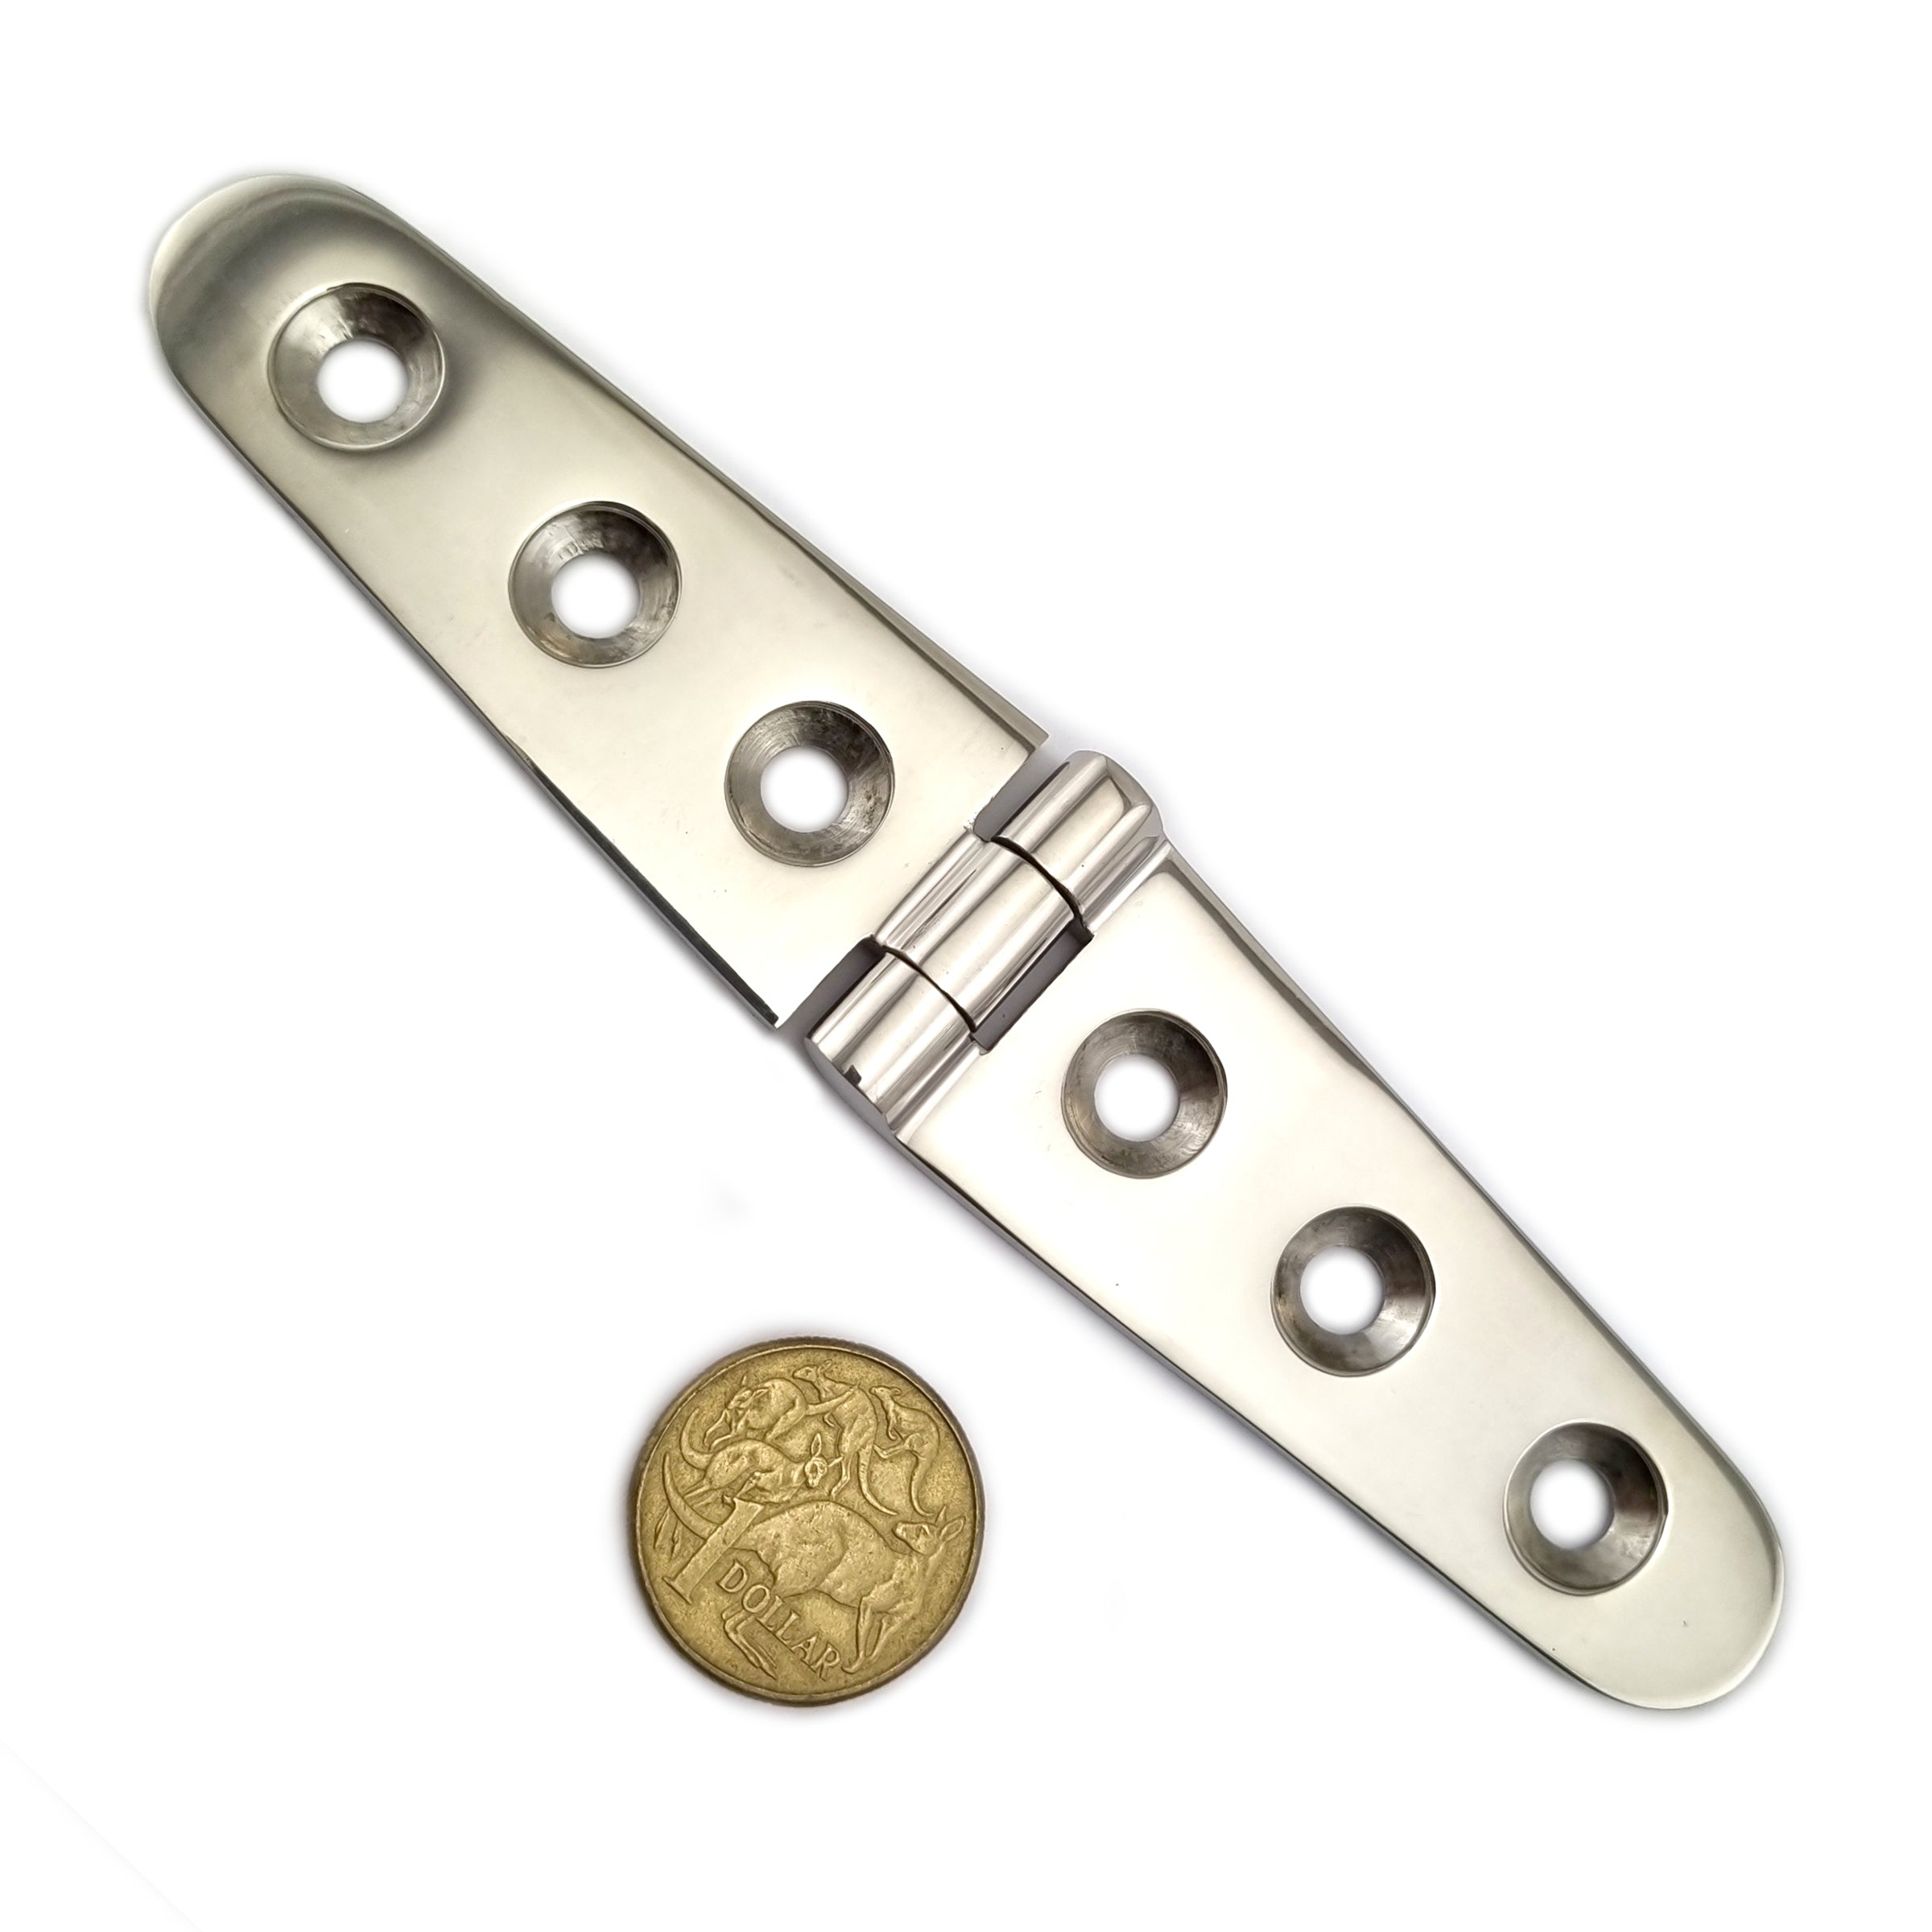 Flat Hinge, Stainless Steel, size: 152mm x 30mm. Shop hardware chain.com.au